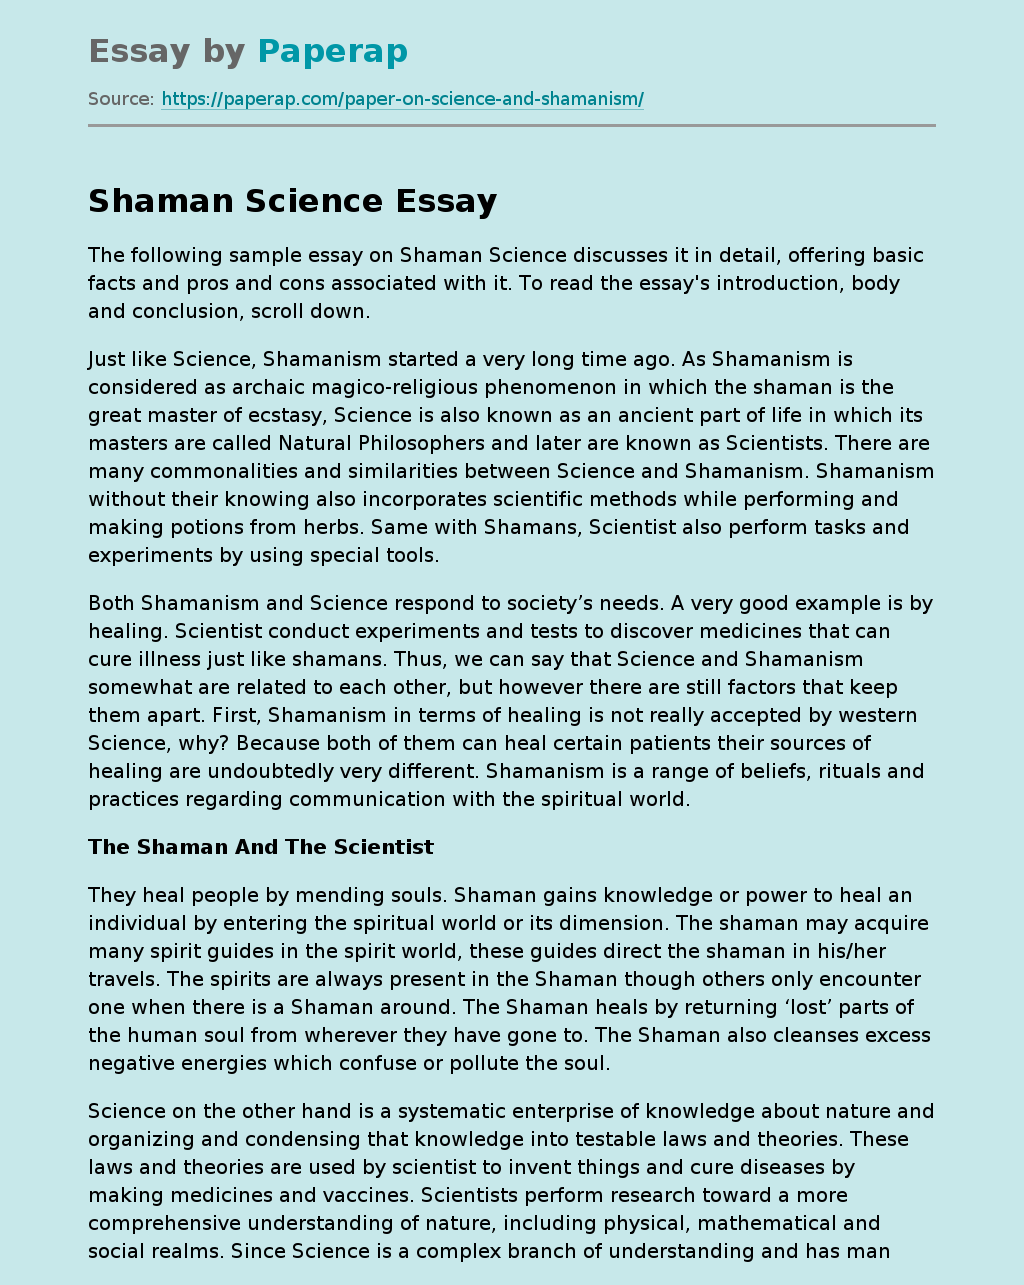 Shamanism as a Science